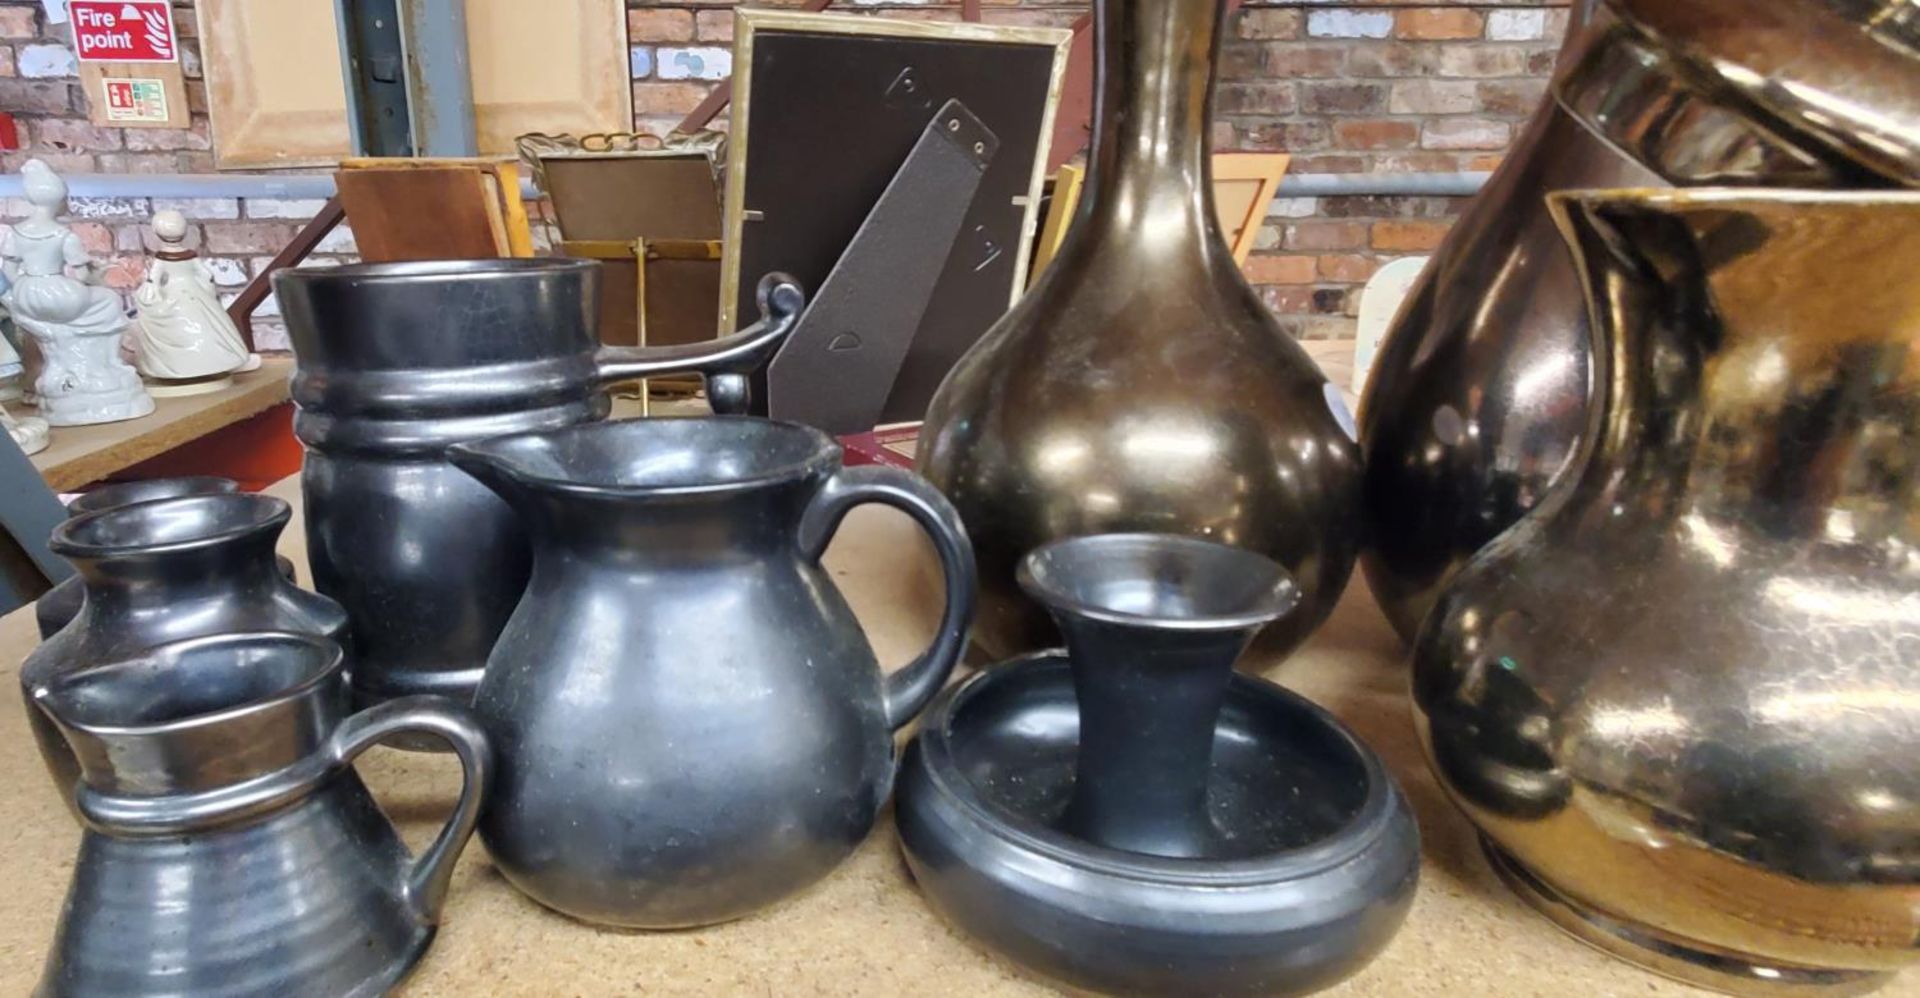 A LARGE QUANTITY OF PRINKNASH POTTERY TO INCLUDE JUGS, TANKARDS, VASES, POTS, ETC - Image 2 of 3